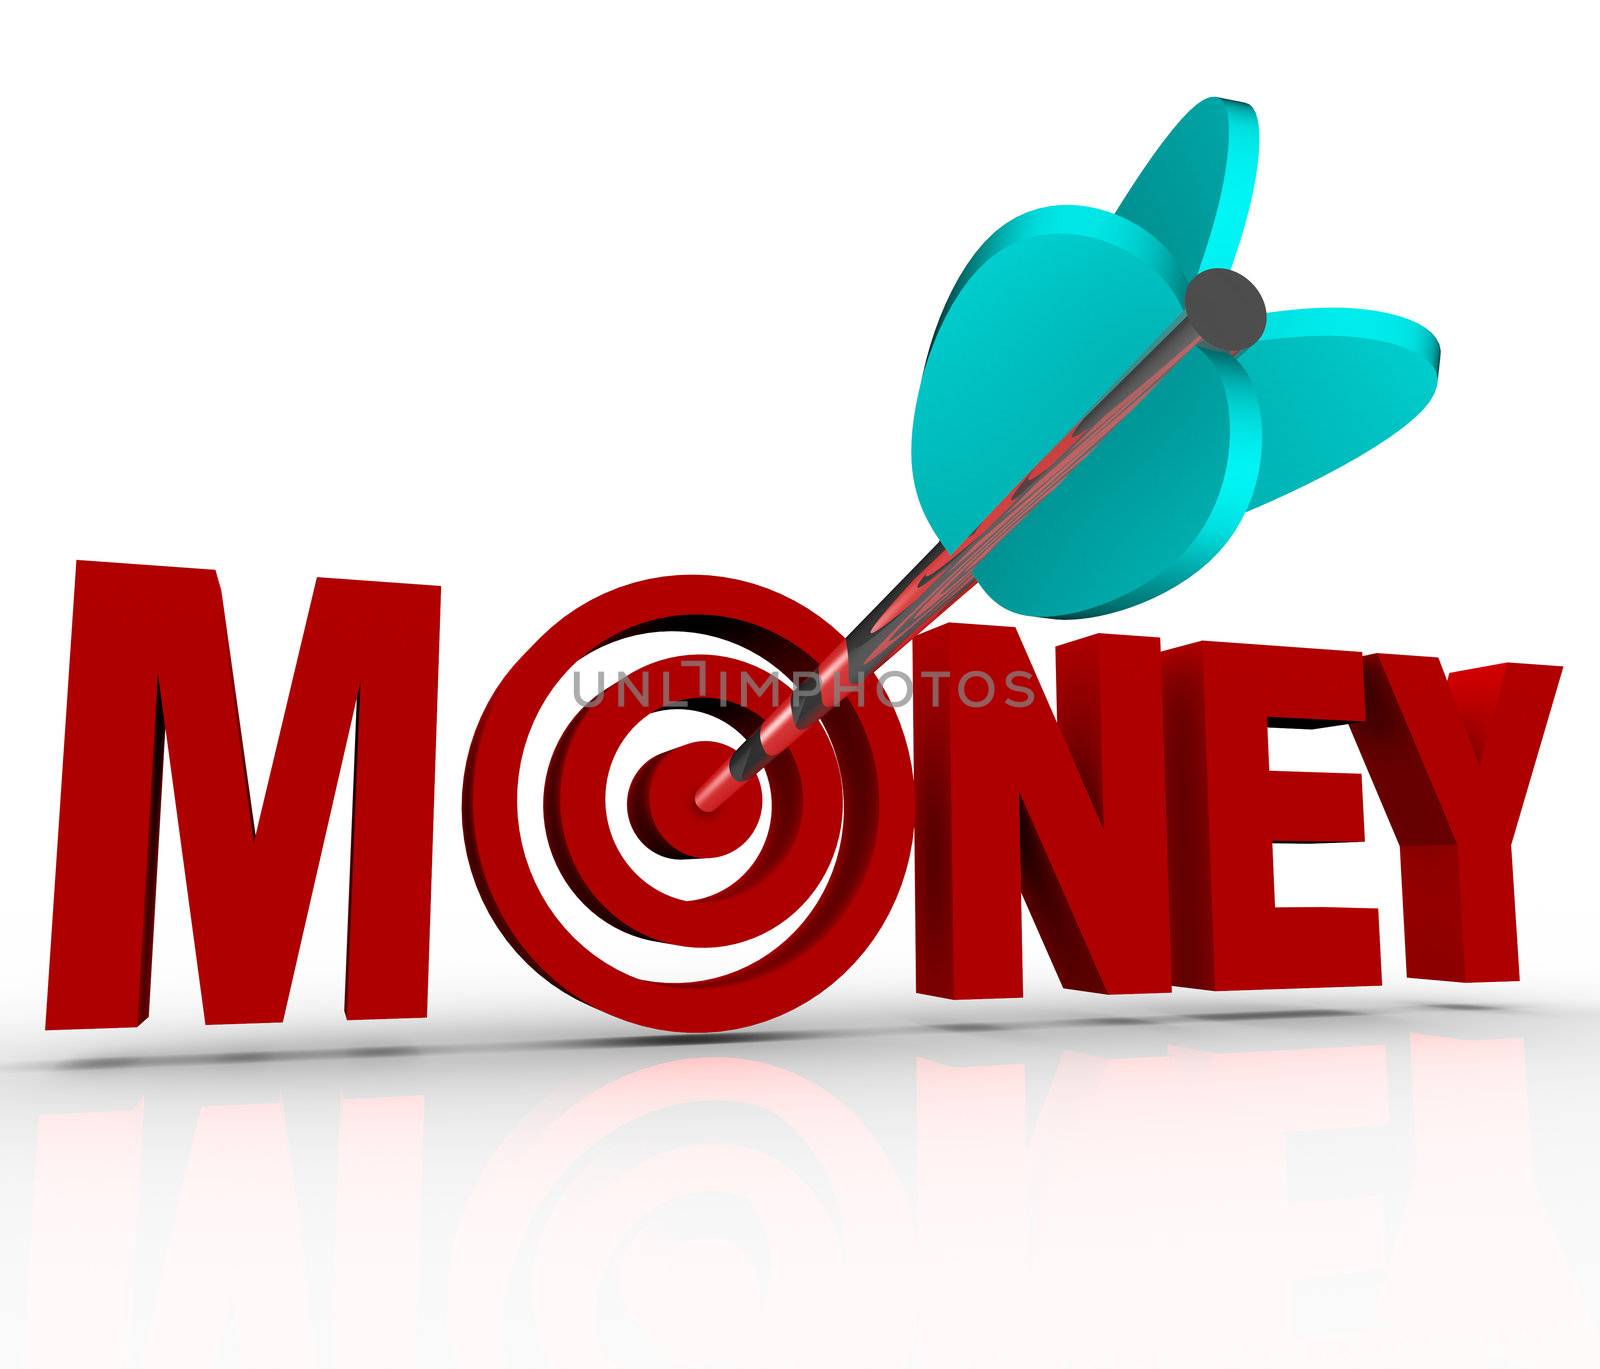 The word money in 3d red letters and an arrow shot into the center target bulls-eye to represent earning great wealth and riches and reaching financial stability